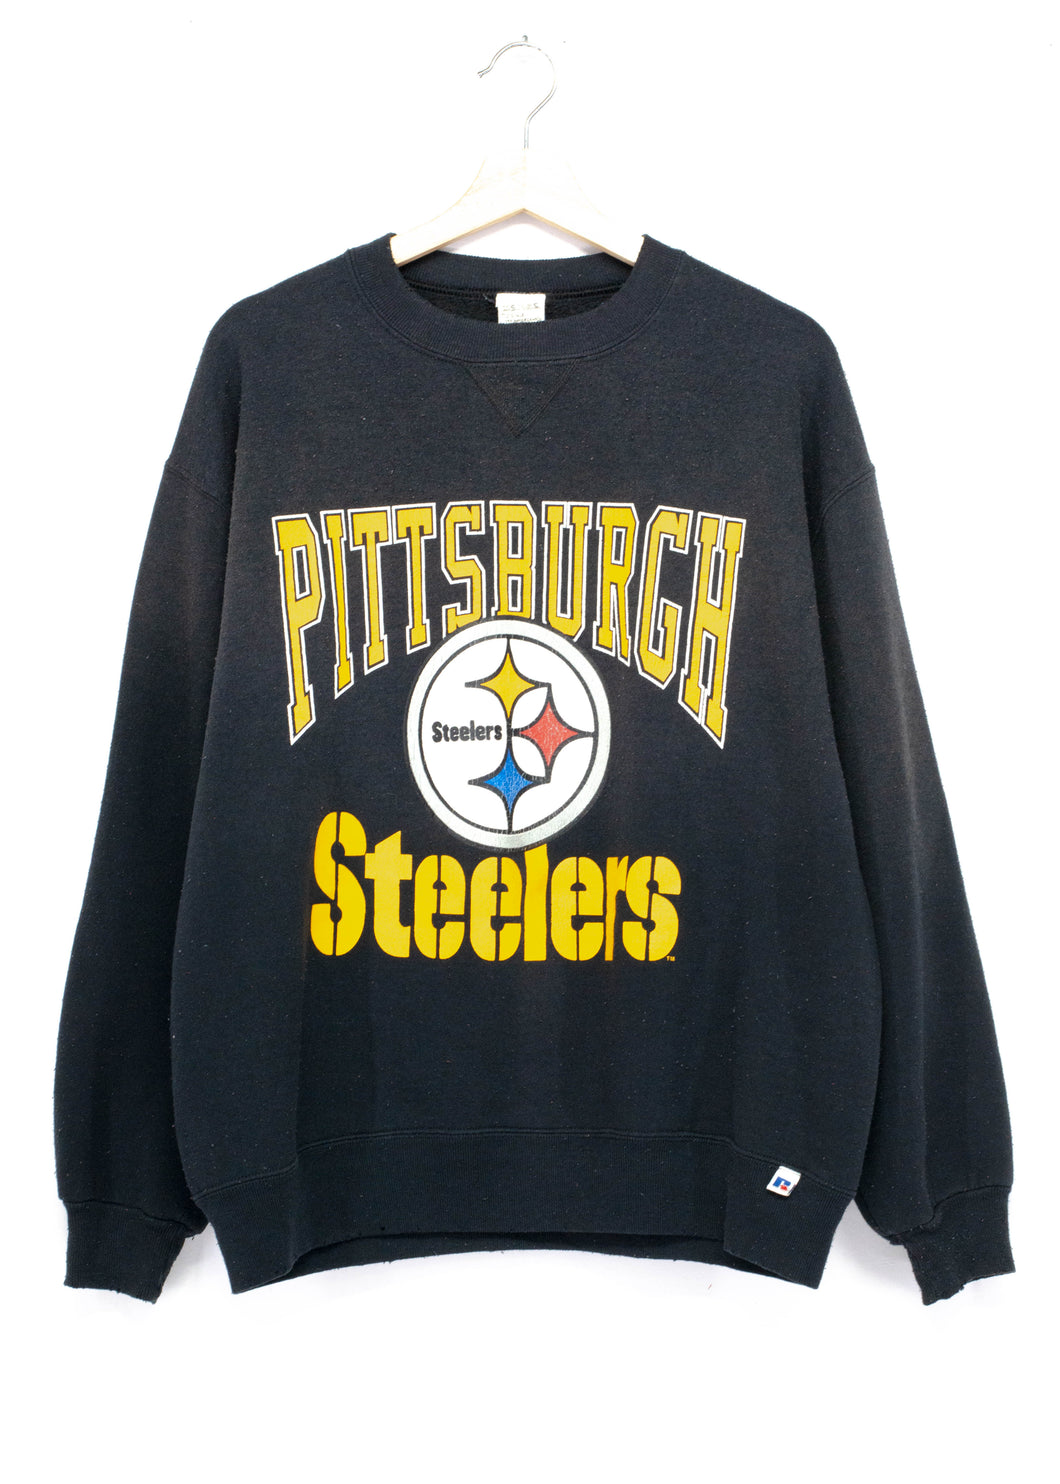 Steelers Sweatshirt -L-Customize Your Embroidery Wording